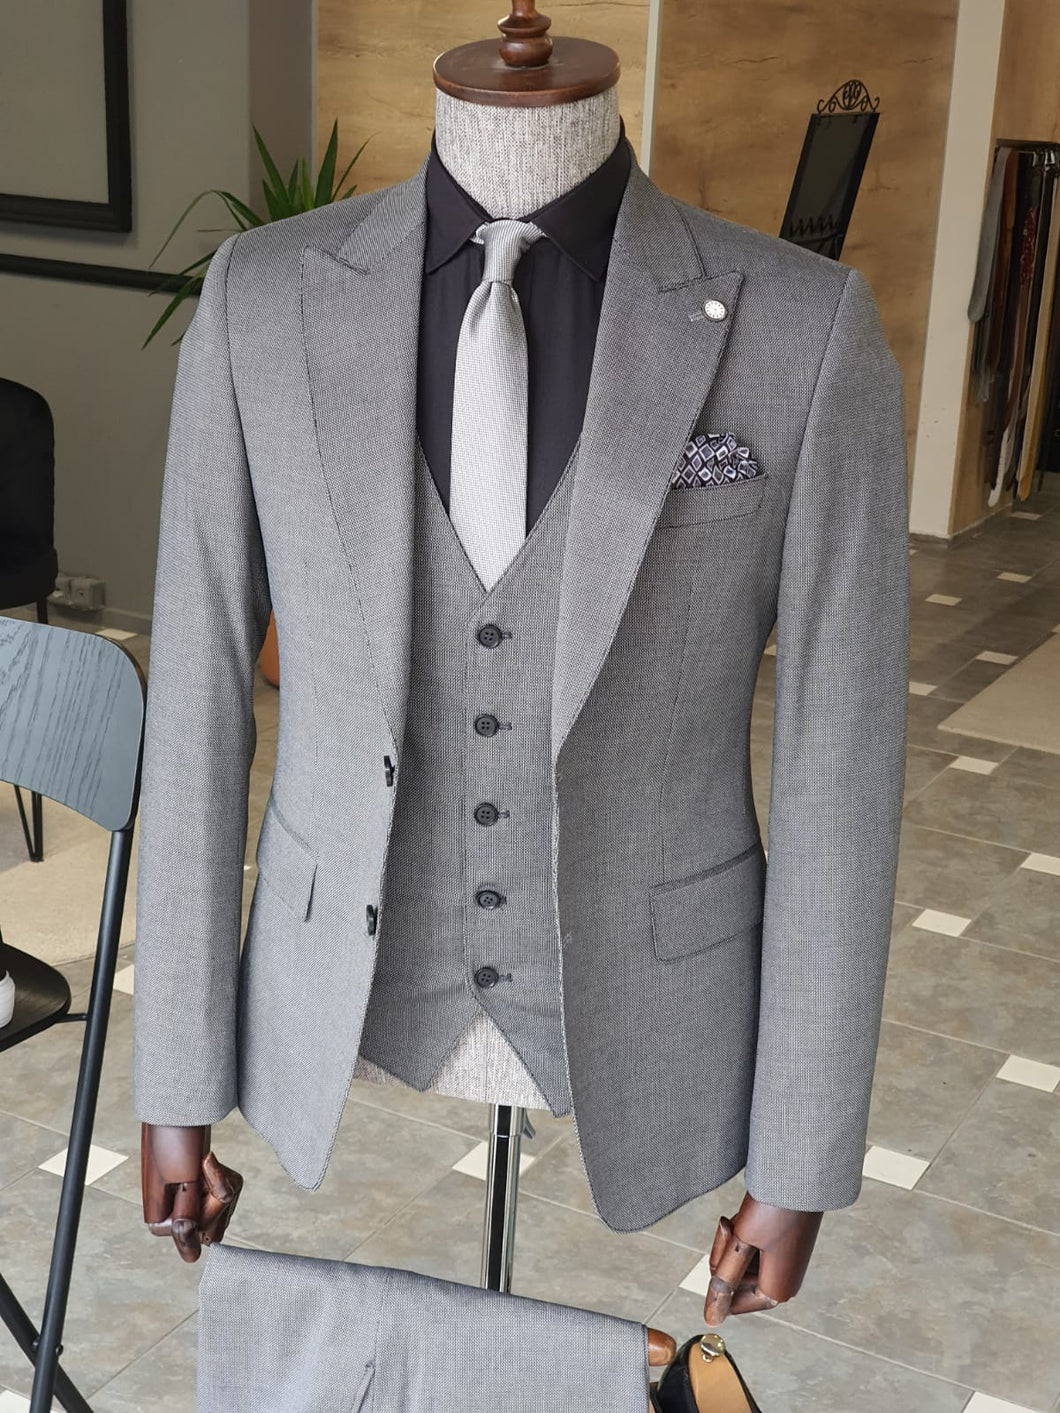 Luxe Slim Fit Grey Vested Suit